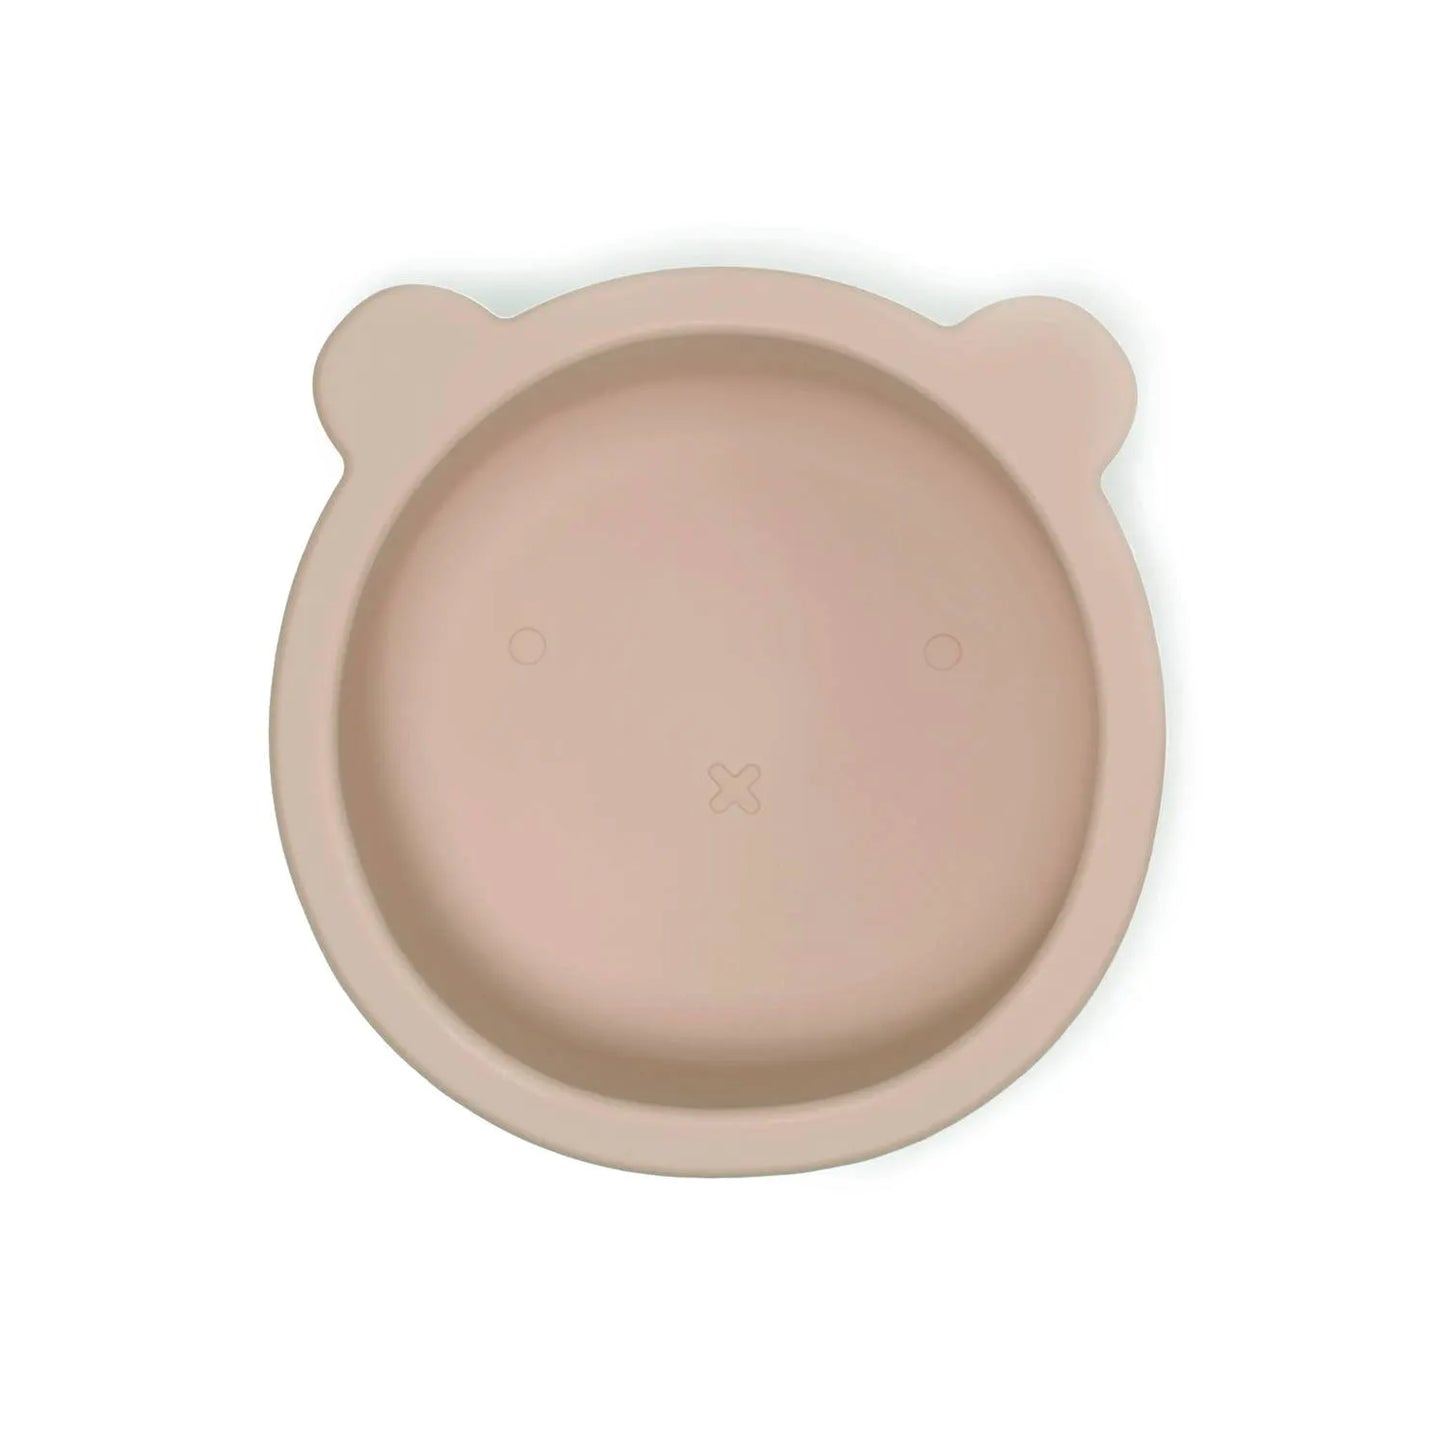 Bol silicone avec couvercle - Taupe